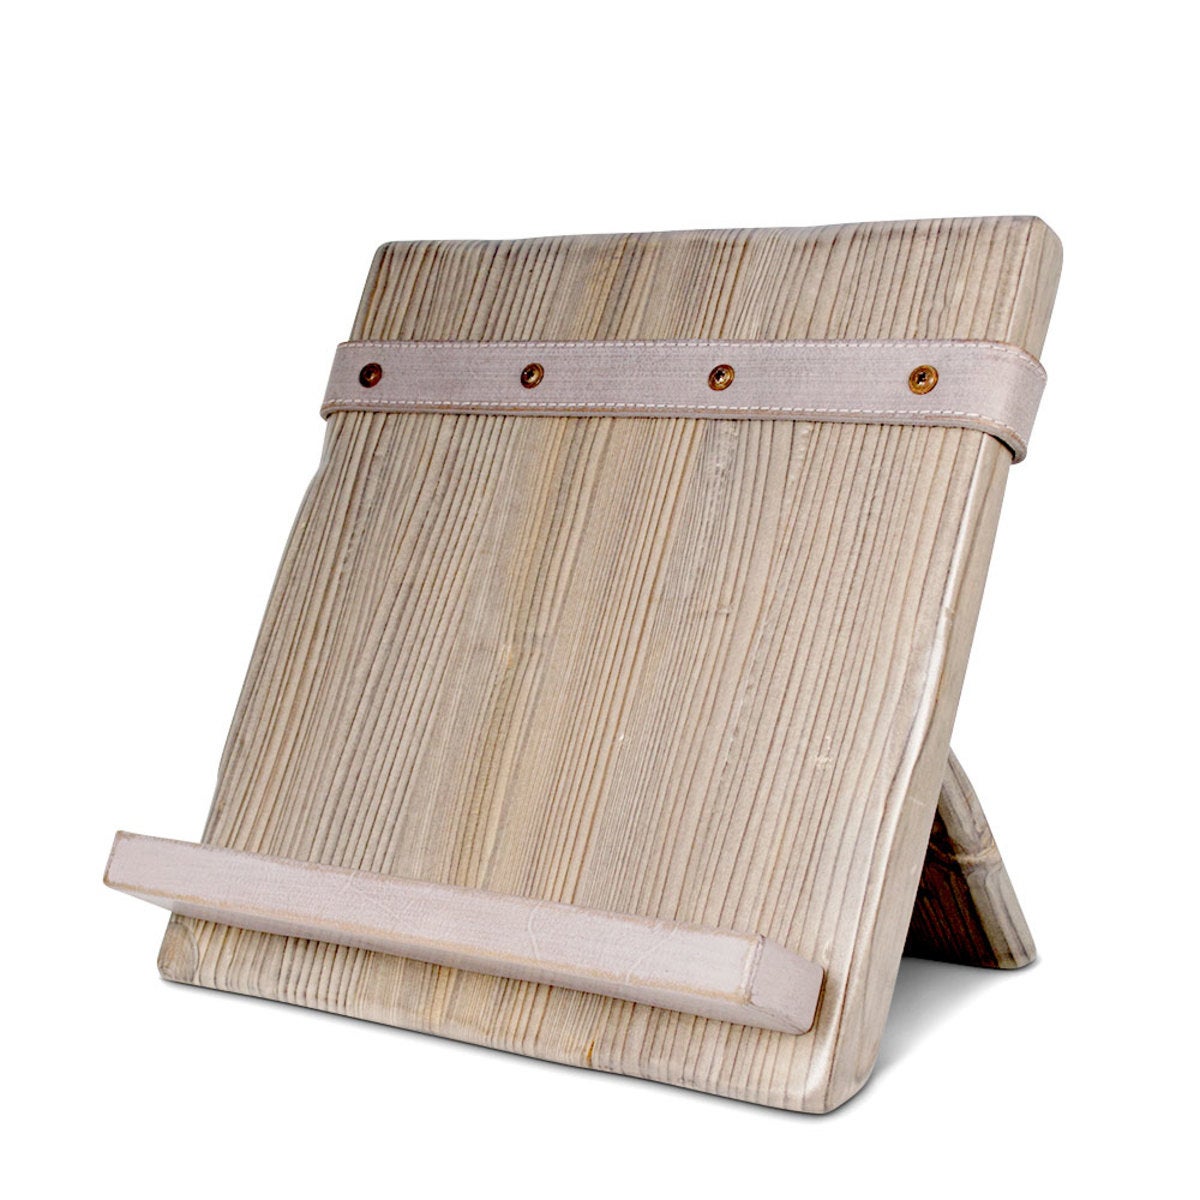 Reclaimed Wood and Salvaged Leather iPad/Cookbook Holder - Gray